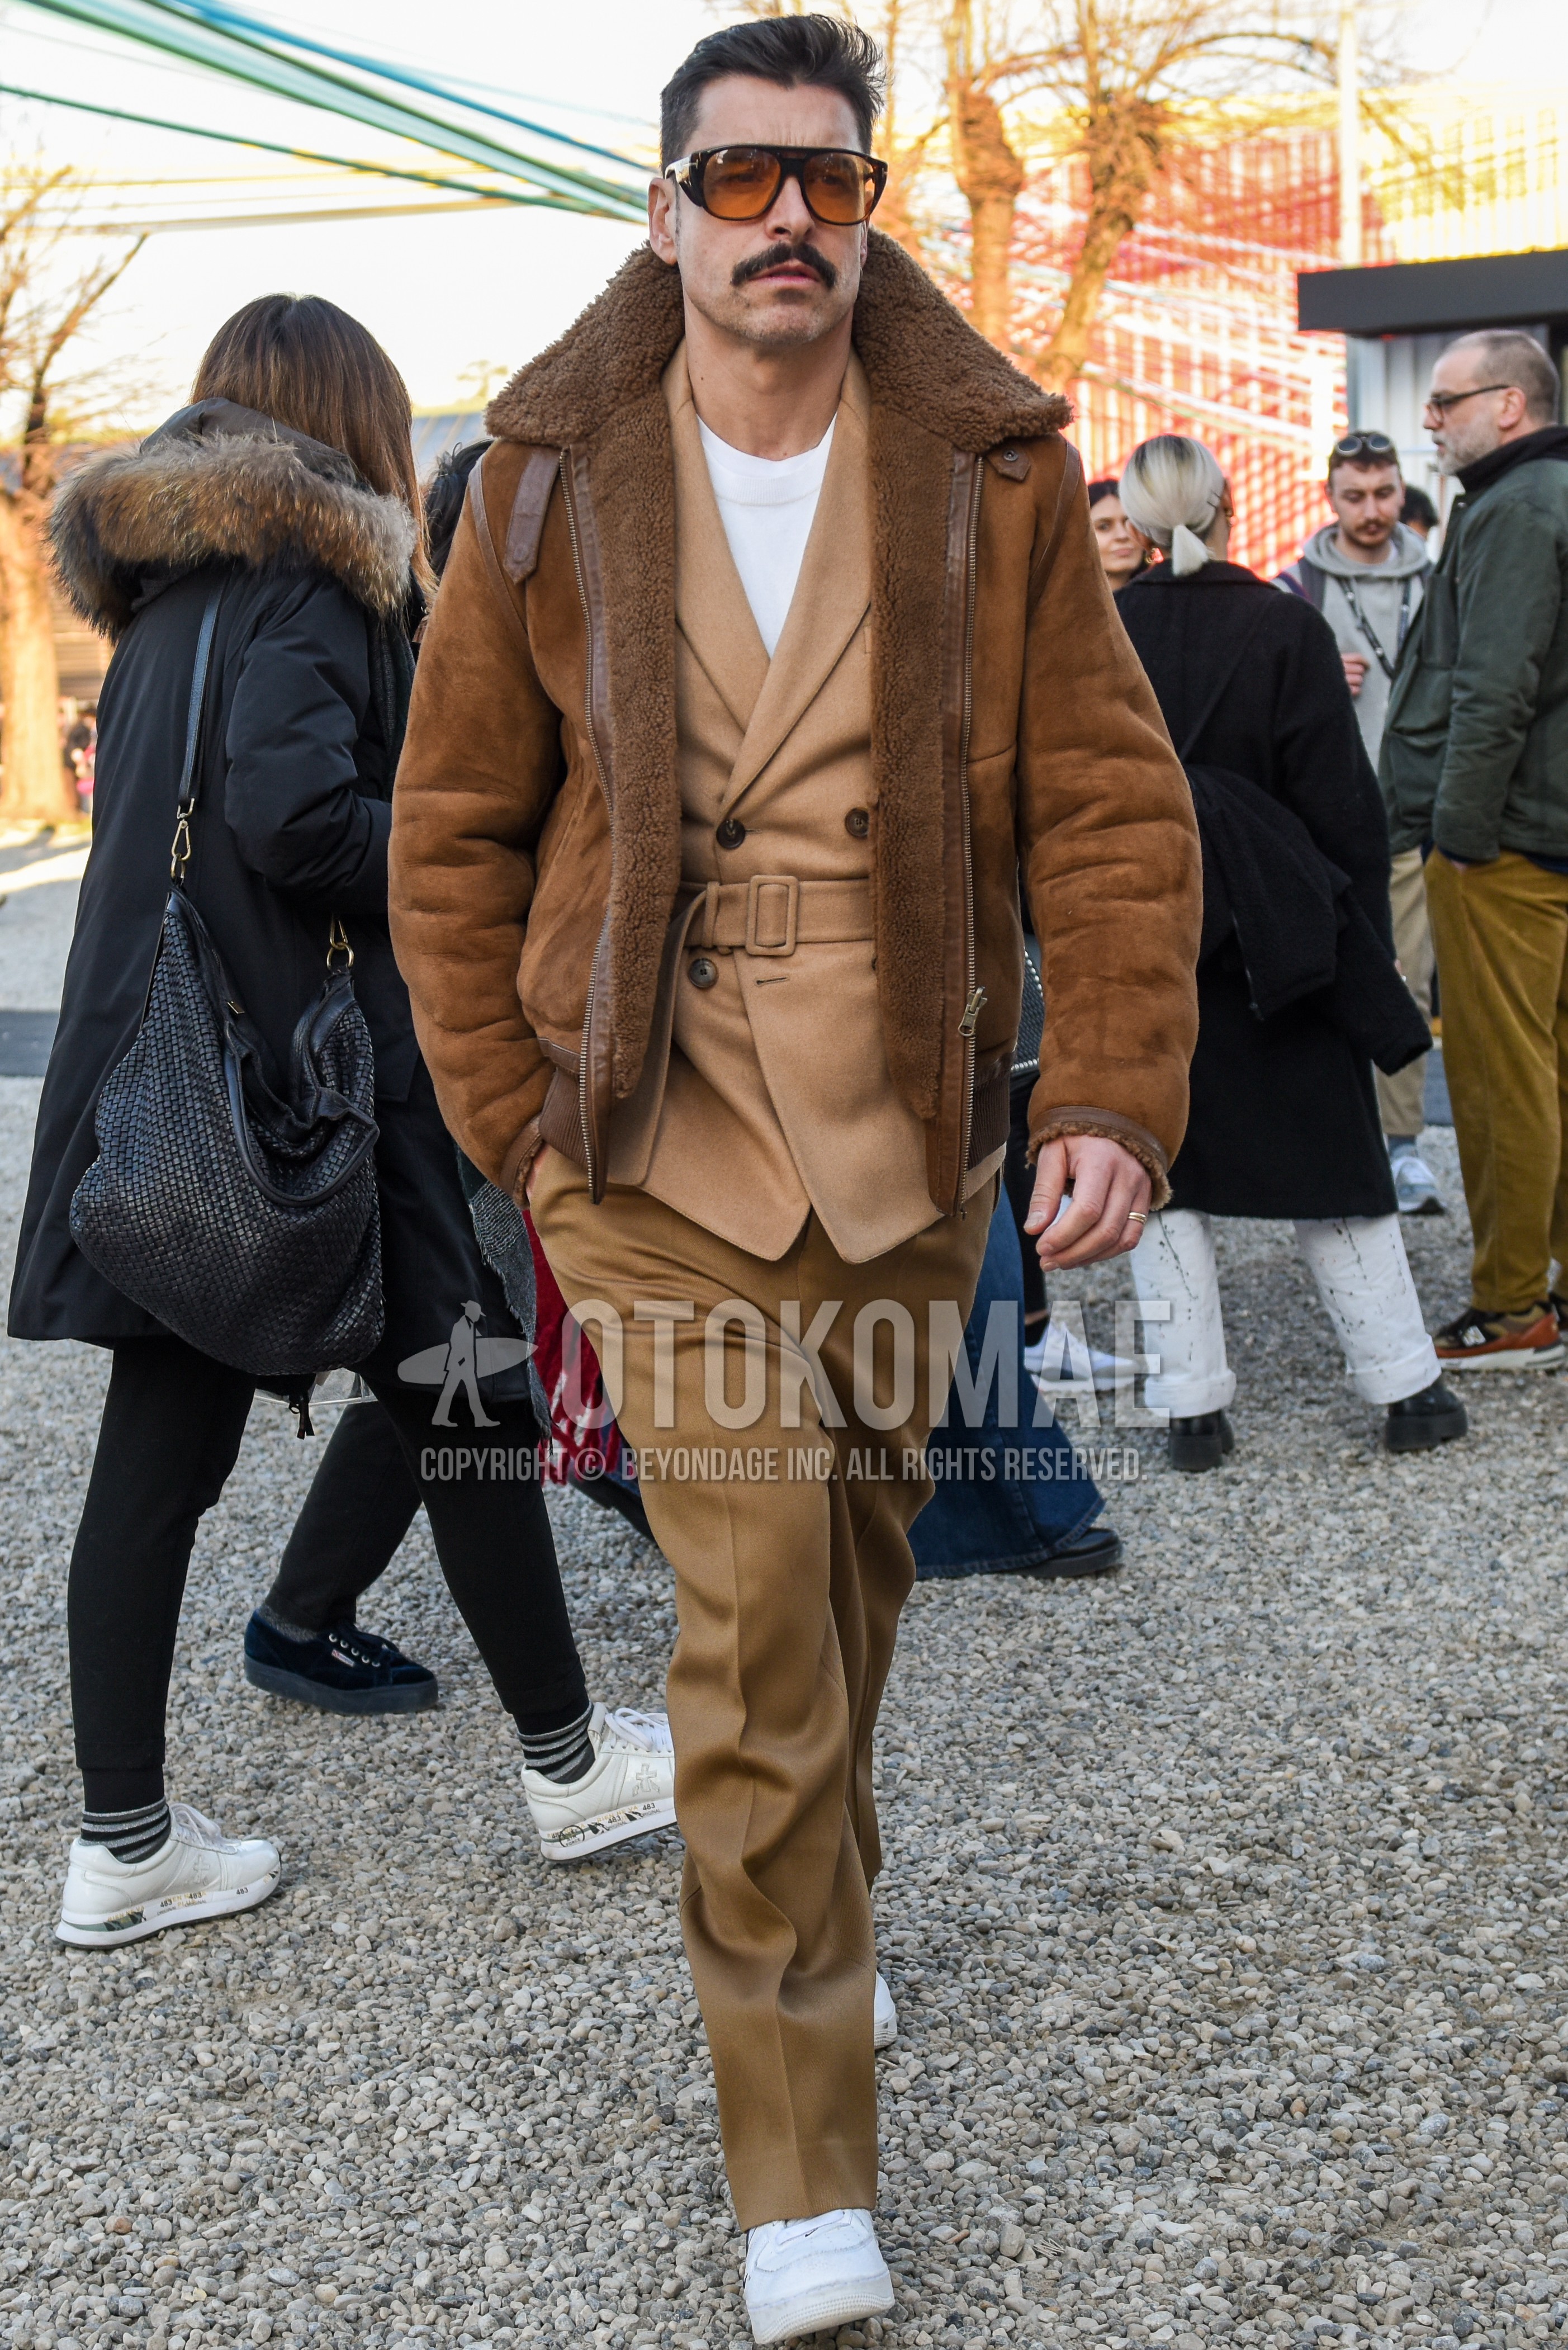 Men's autumn winter outfit with brown tortoiseshell sunglasses, brown plain leather jacket, brown plain military jacket, beige plain tailored jacket, white plain sweater, beige plain chinos, beige plain slacks, white low-cut sneakers.